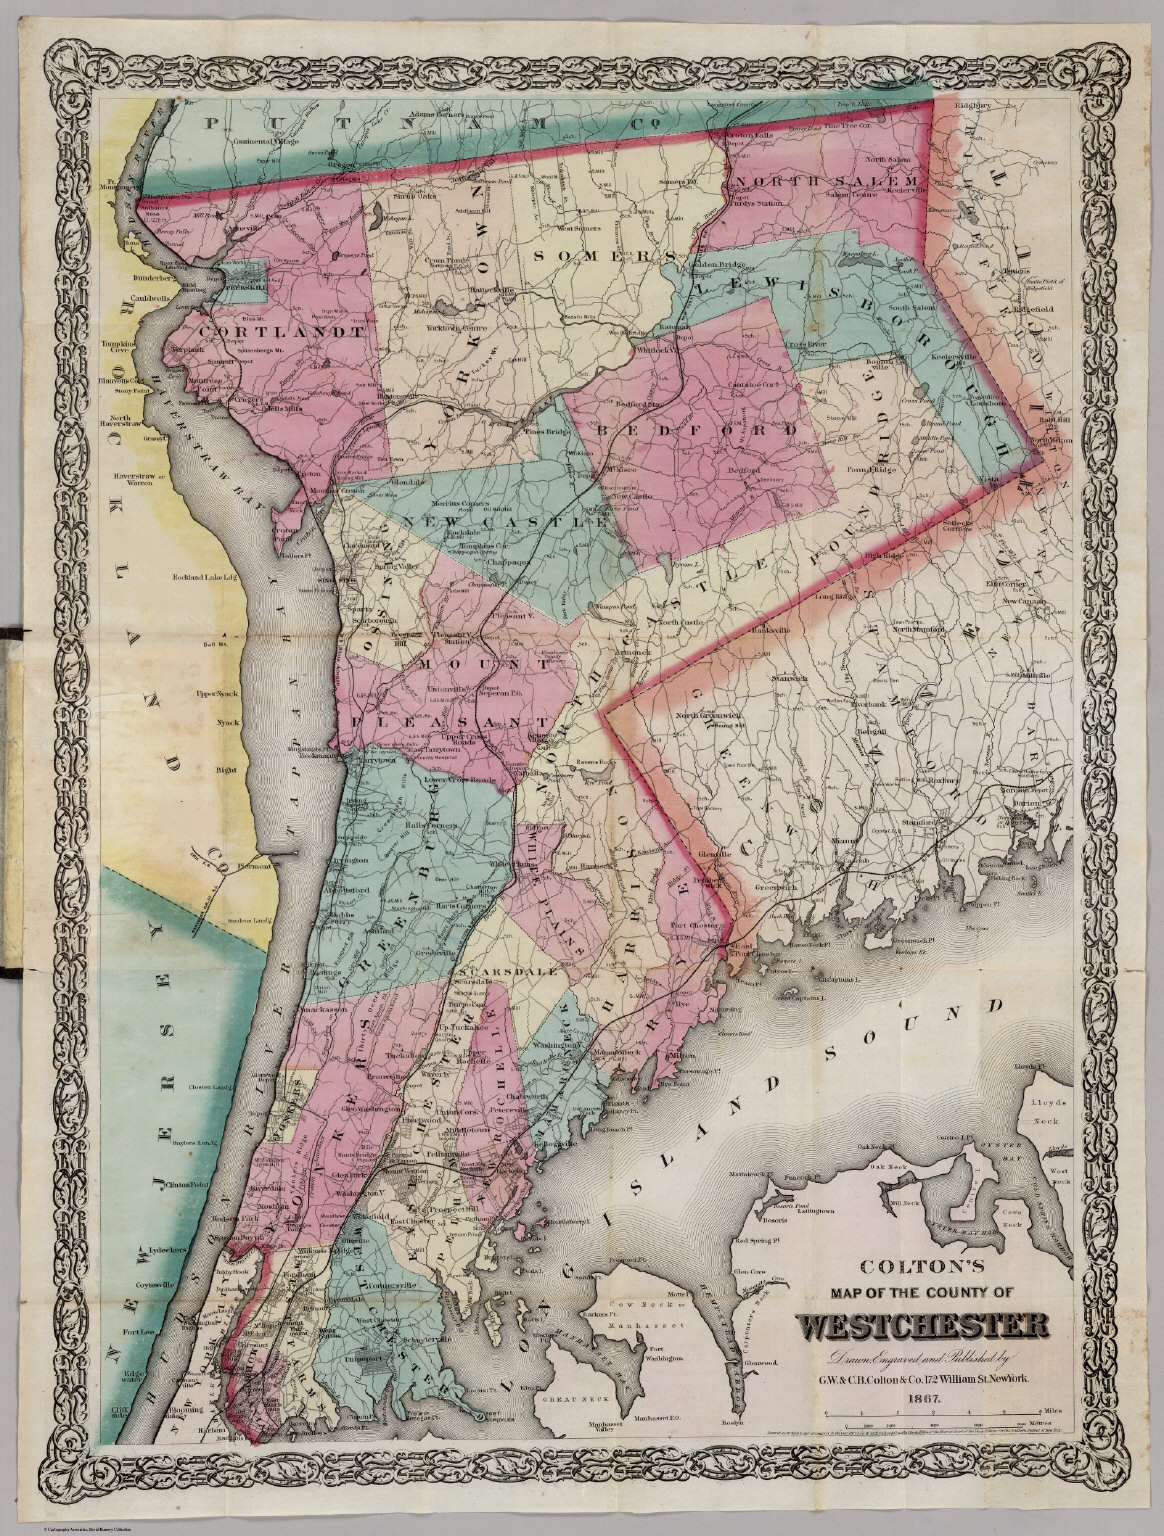 Westchester County New York David Rumsey Historical Map Collection 0038